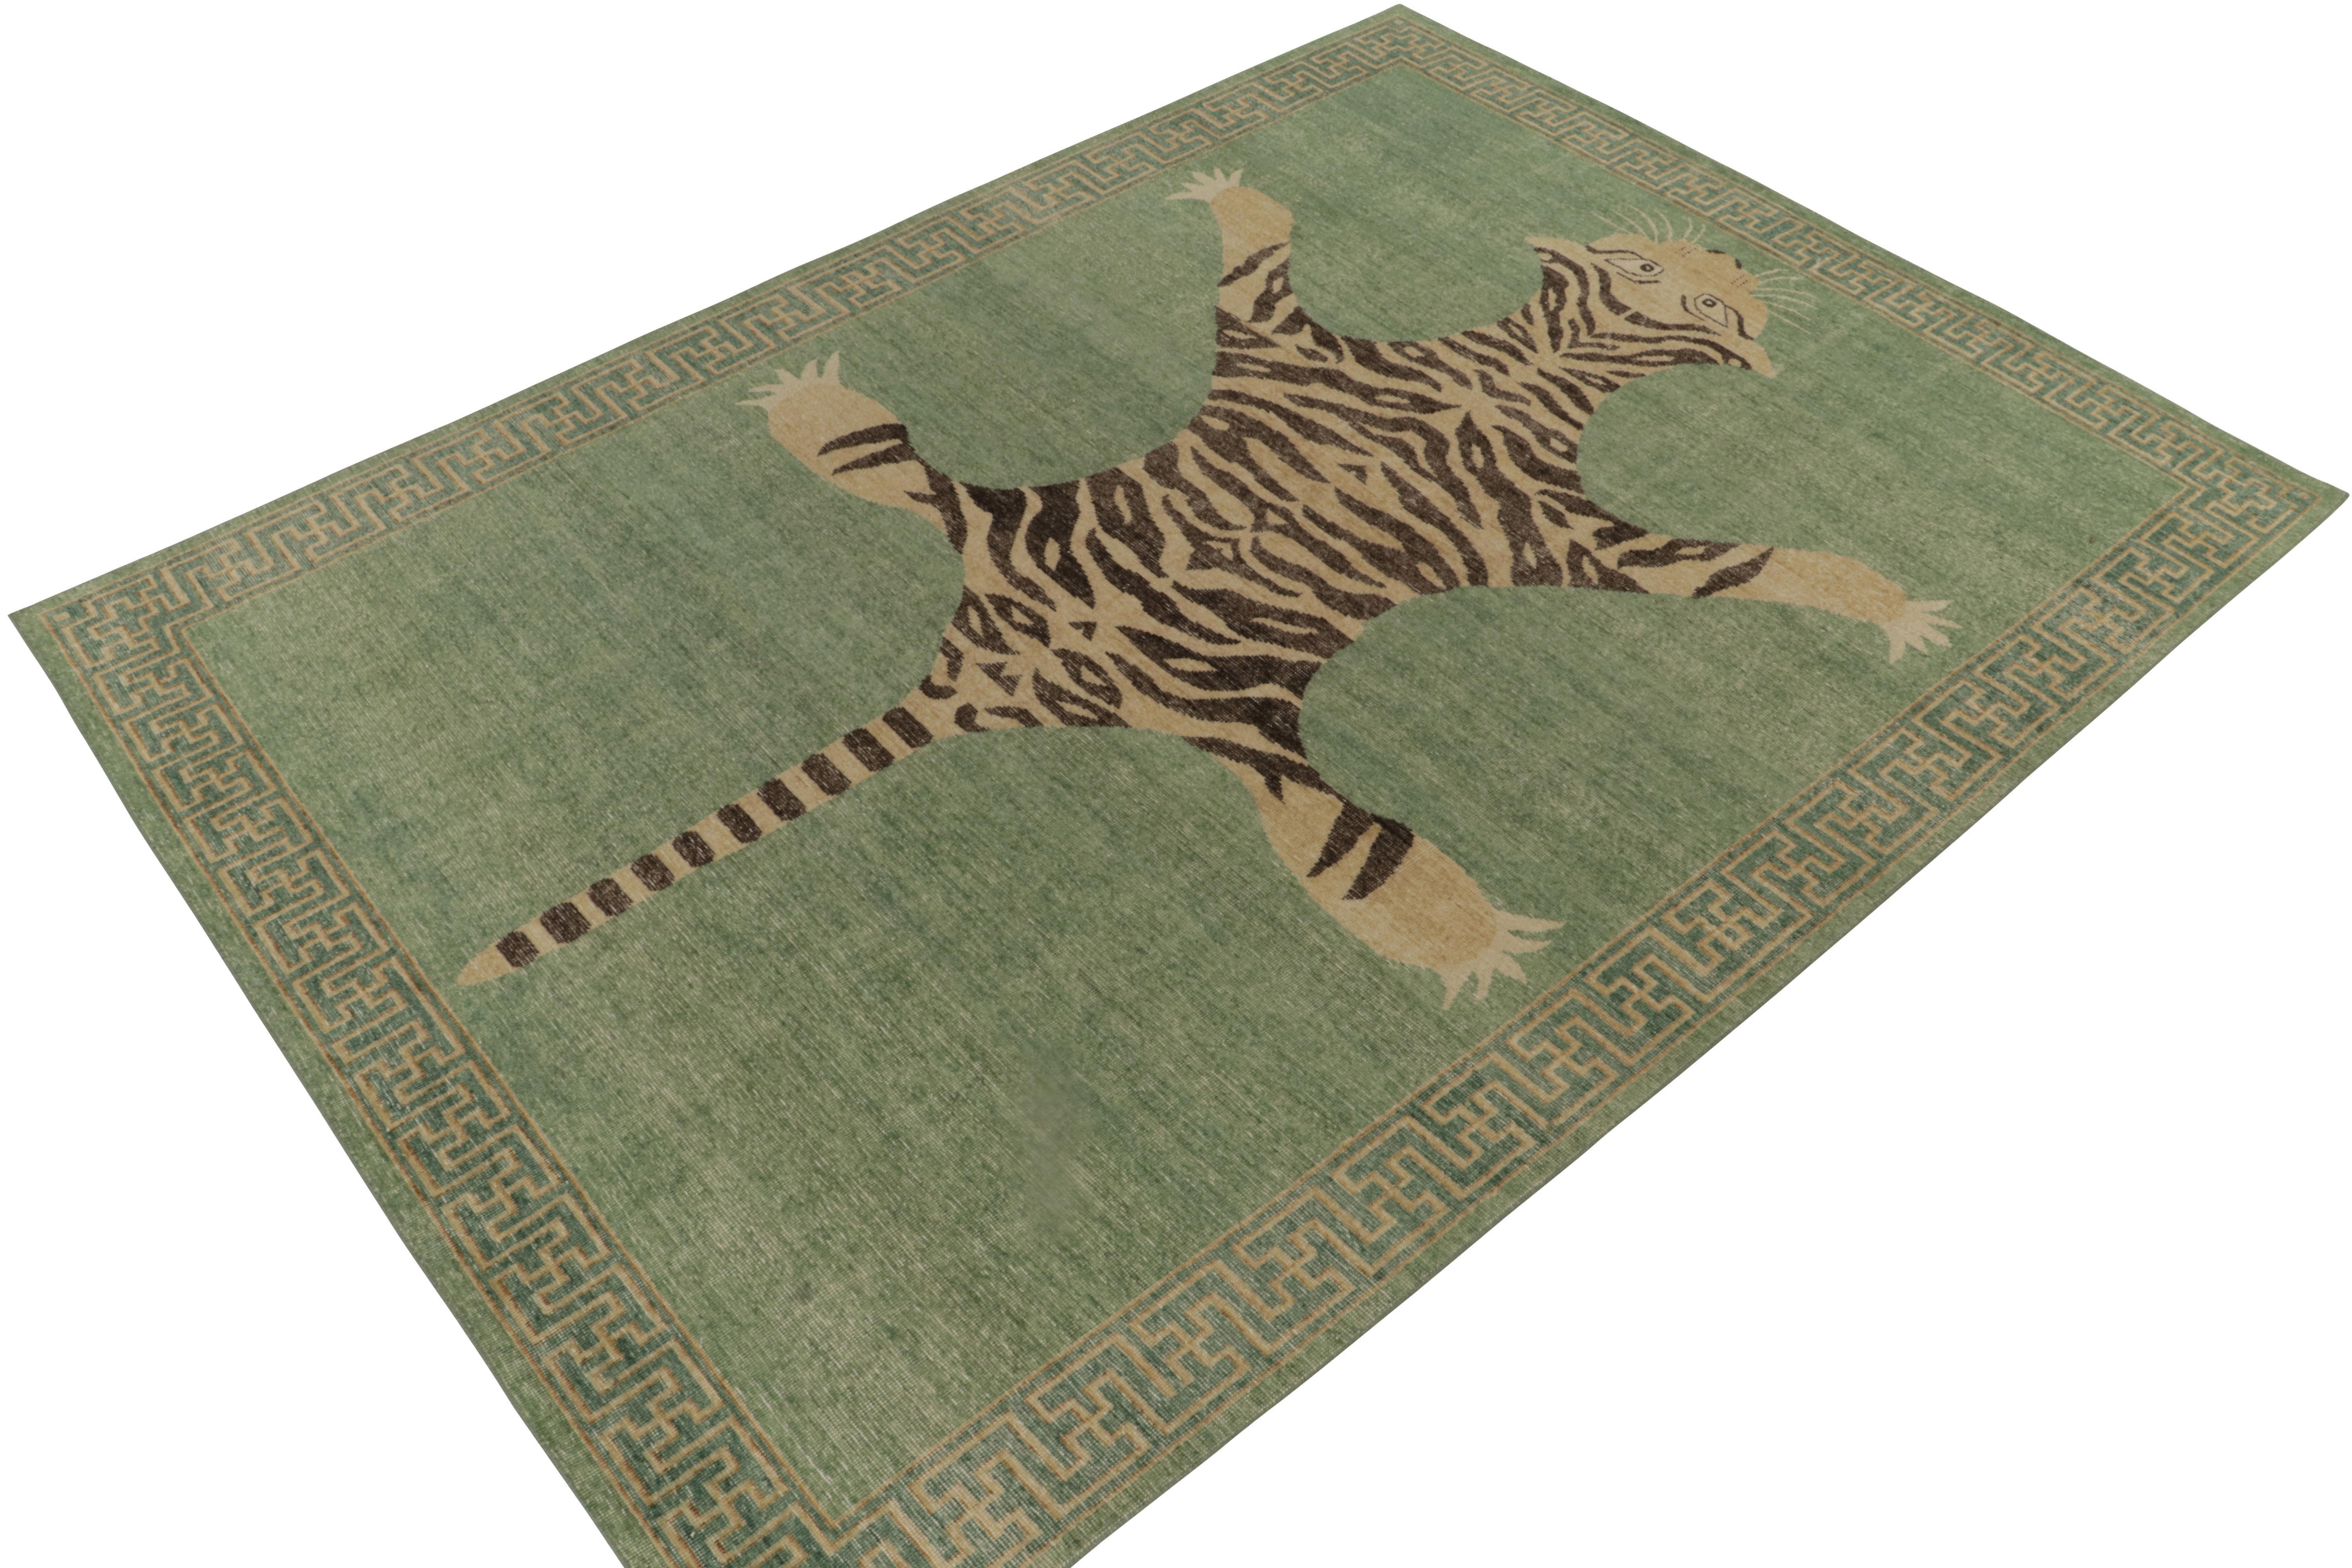 From Rug & Kilim’s Homage Collection, a 9x12 hand-knotted wool piece recapturing the time-honored Tiger skin rug in its glory. 

On the Design: This piece is inspired by antique Indian Tiger-skin rugs of the most regal, inviting presence. Tones of